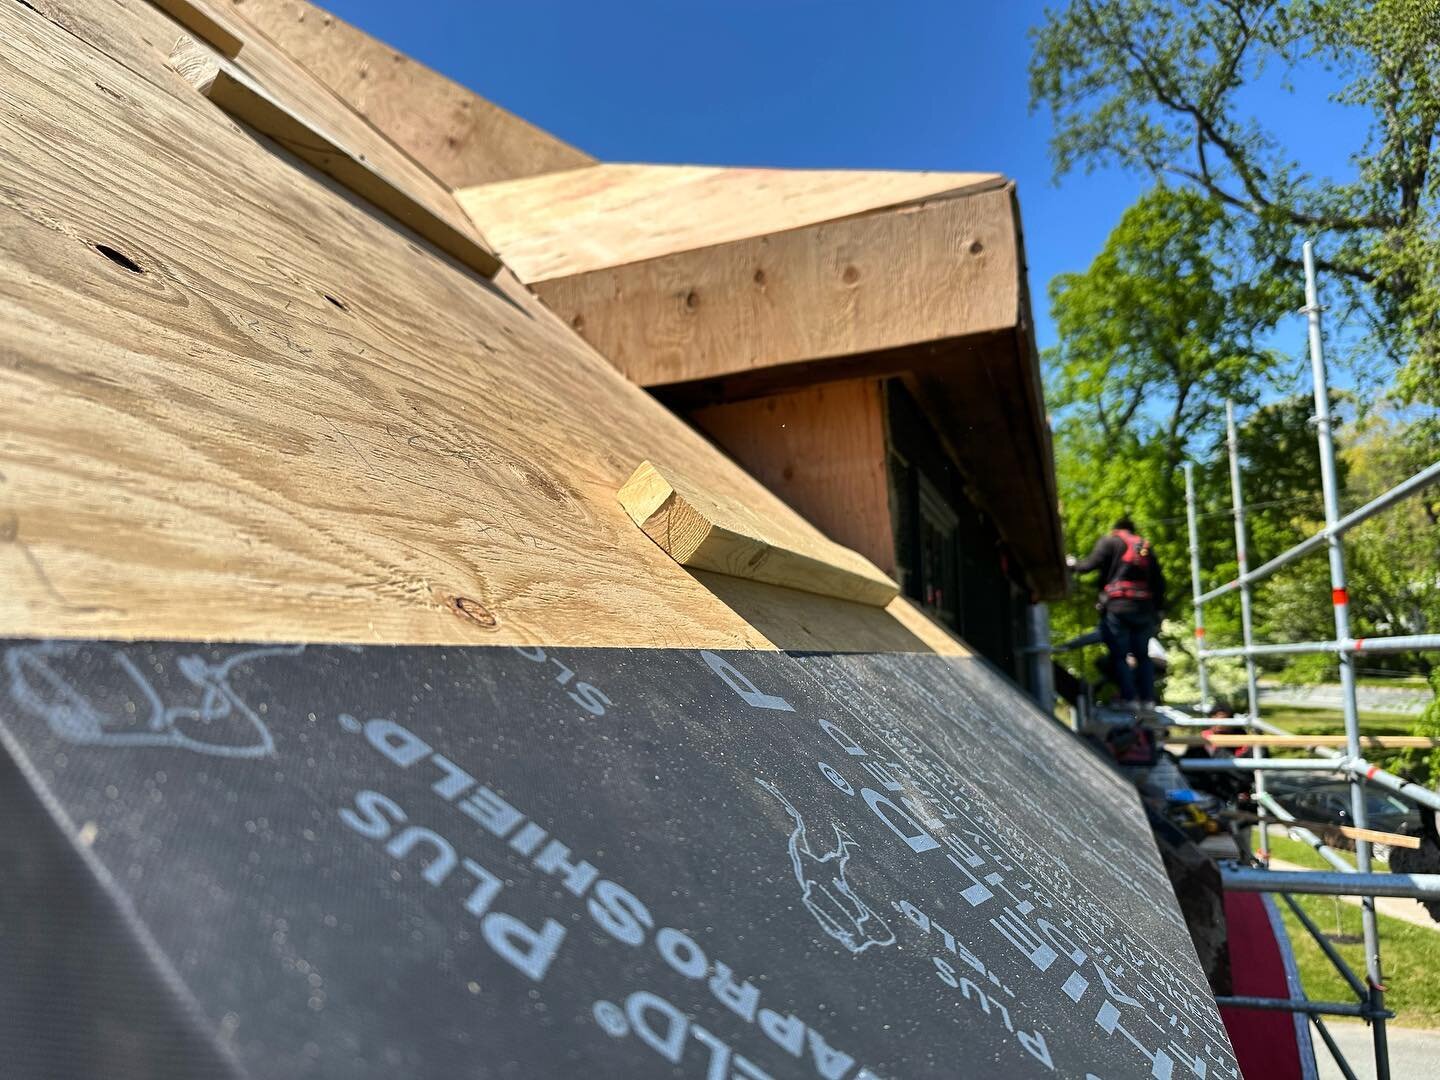 Vaproshield | SlopeShield PLUS. Highly breathable roof membrane for use under a variety of roofing materials. SlopeShield Plus can also be left exposed for up to 6 months (180 days) prior to final roof system installation. 
.
.
.
#buildingenclosure #